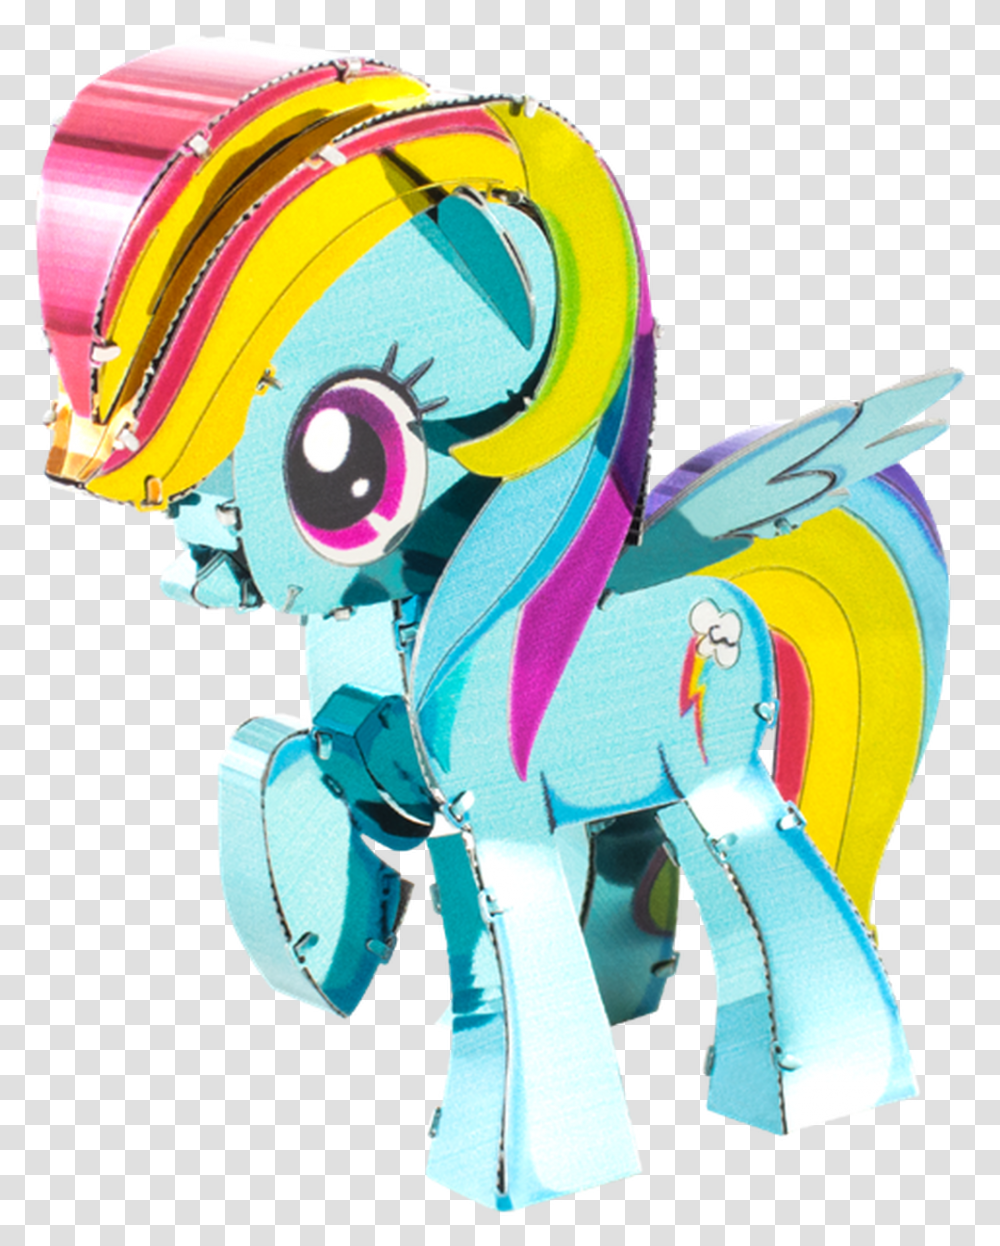 Picture Of Rainbow Dash My Little Pony Metal Earth, Helmet, Apparel Transparent Png